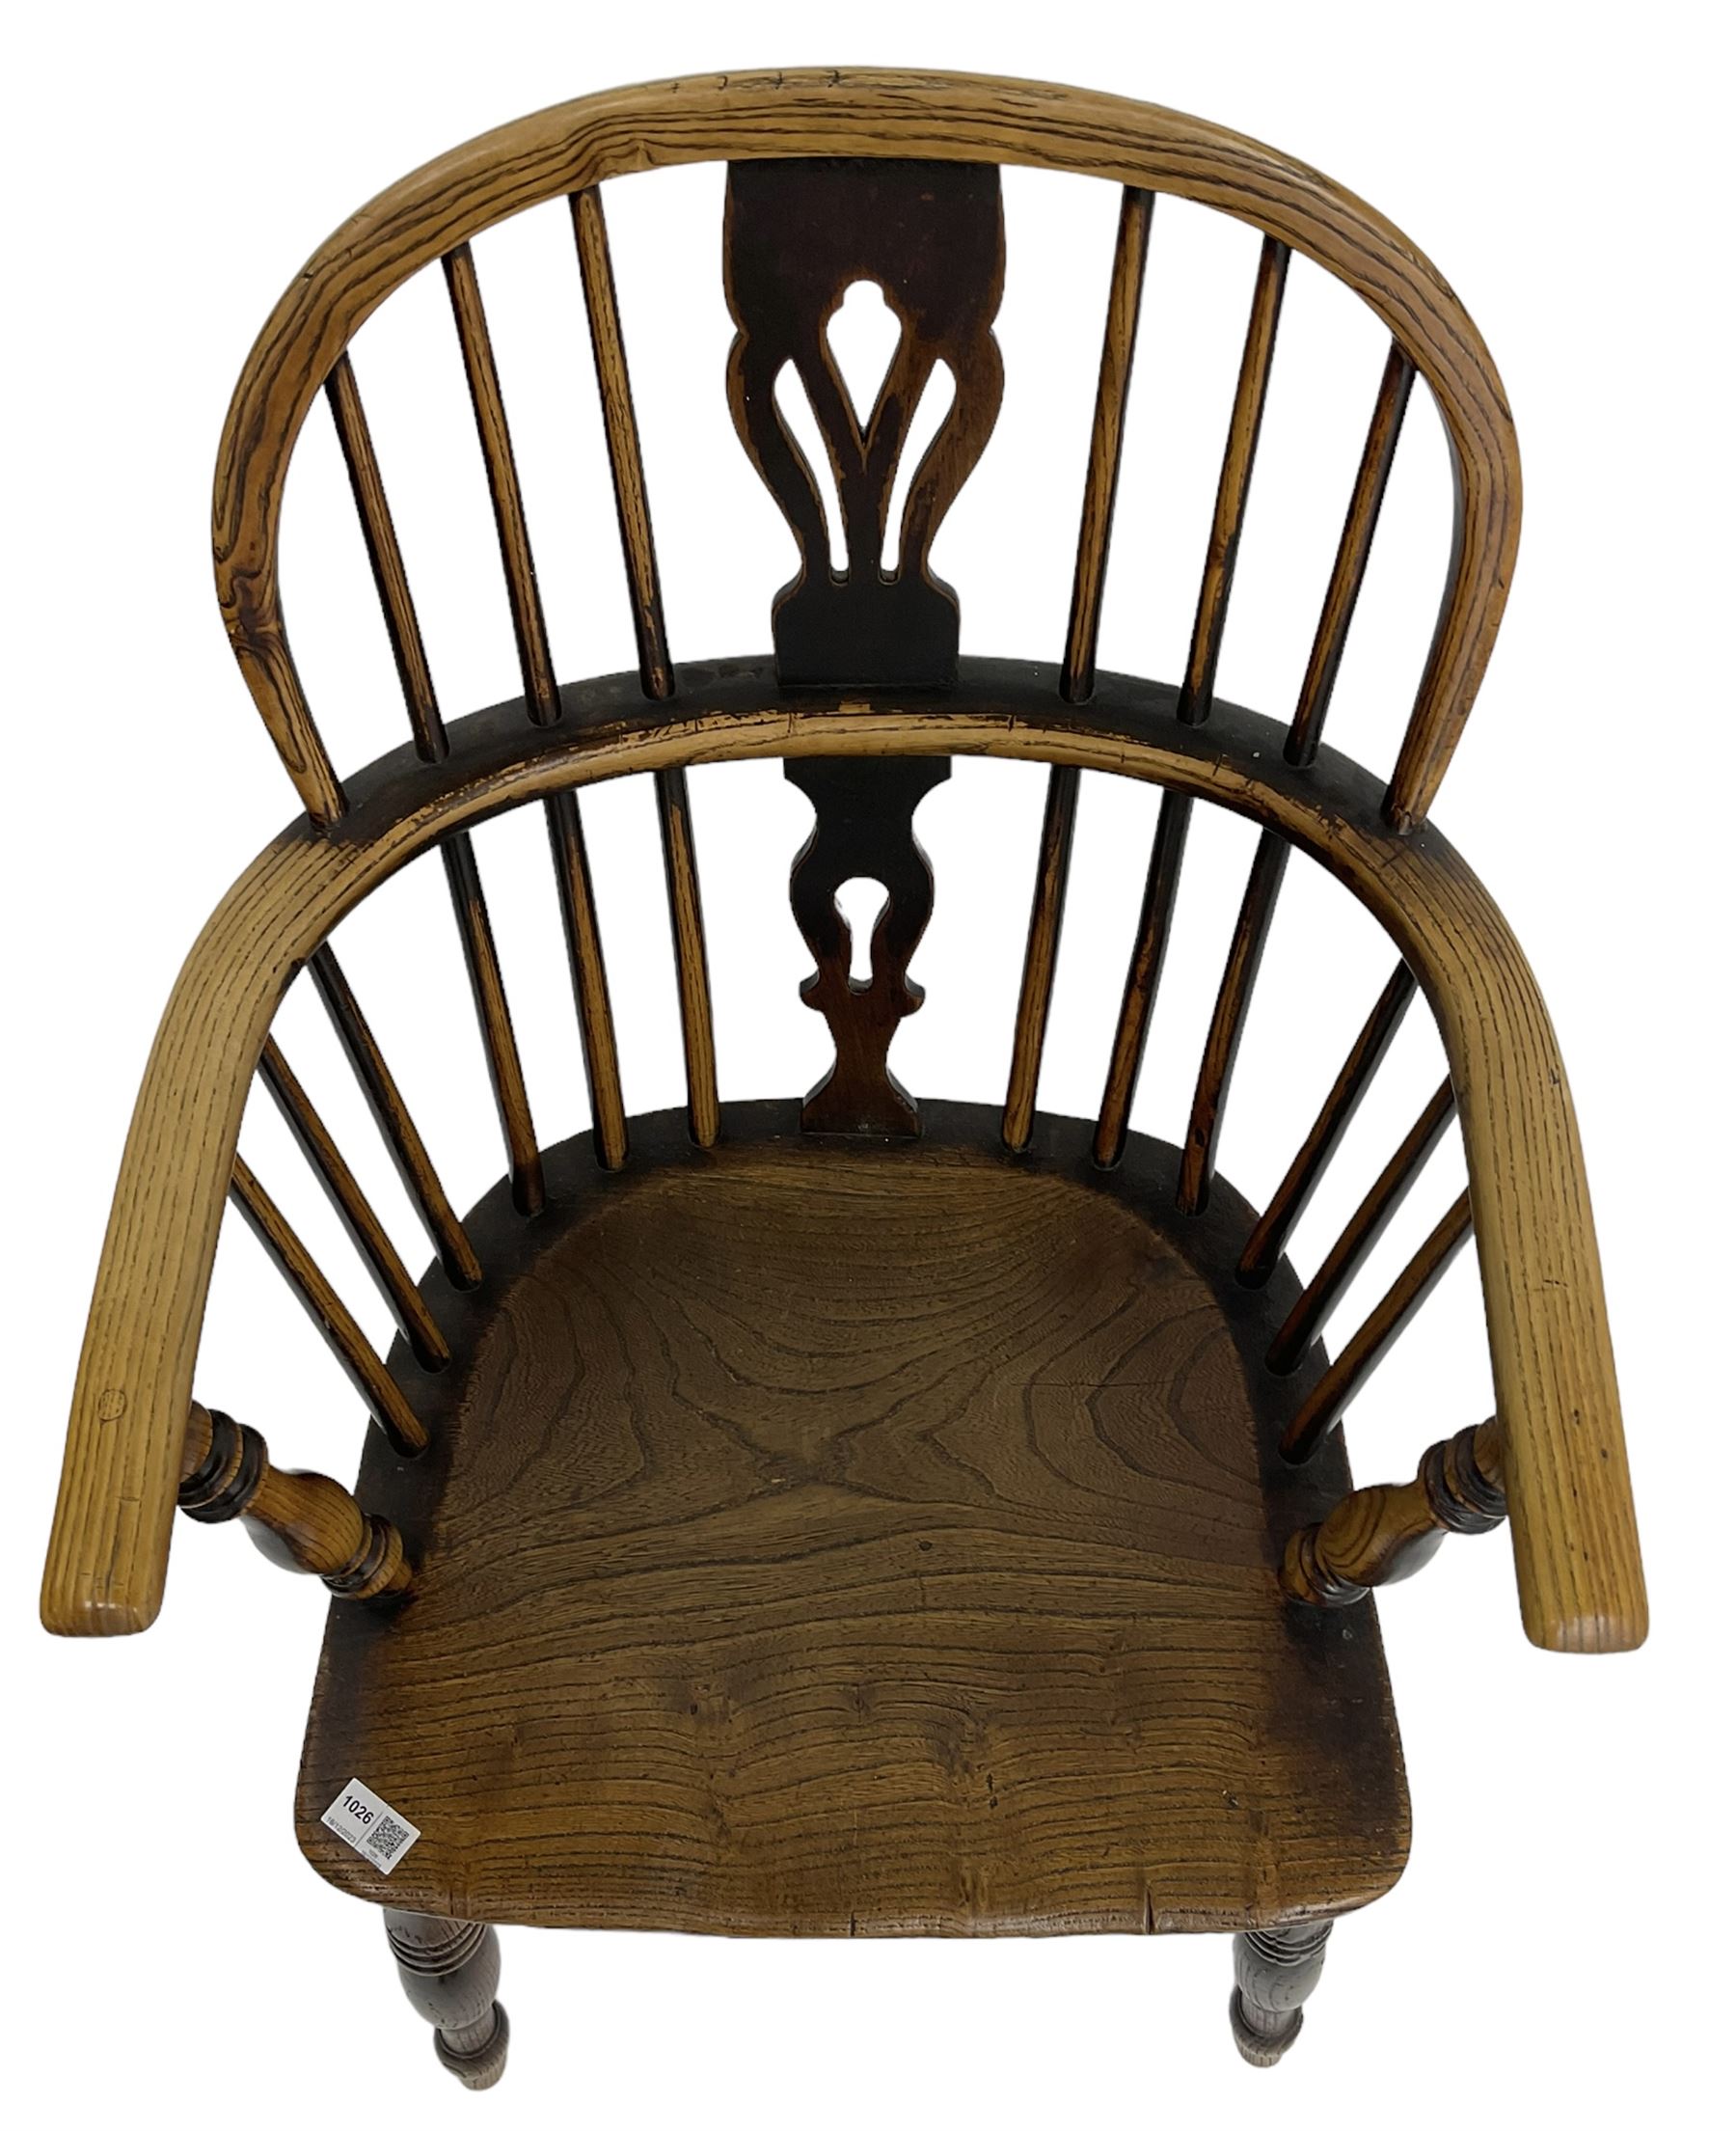 19th century elm and ash Windsor armchair - Image 7 of 7